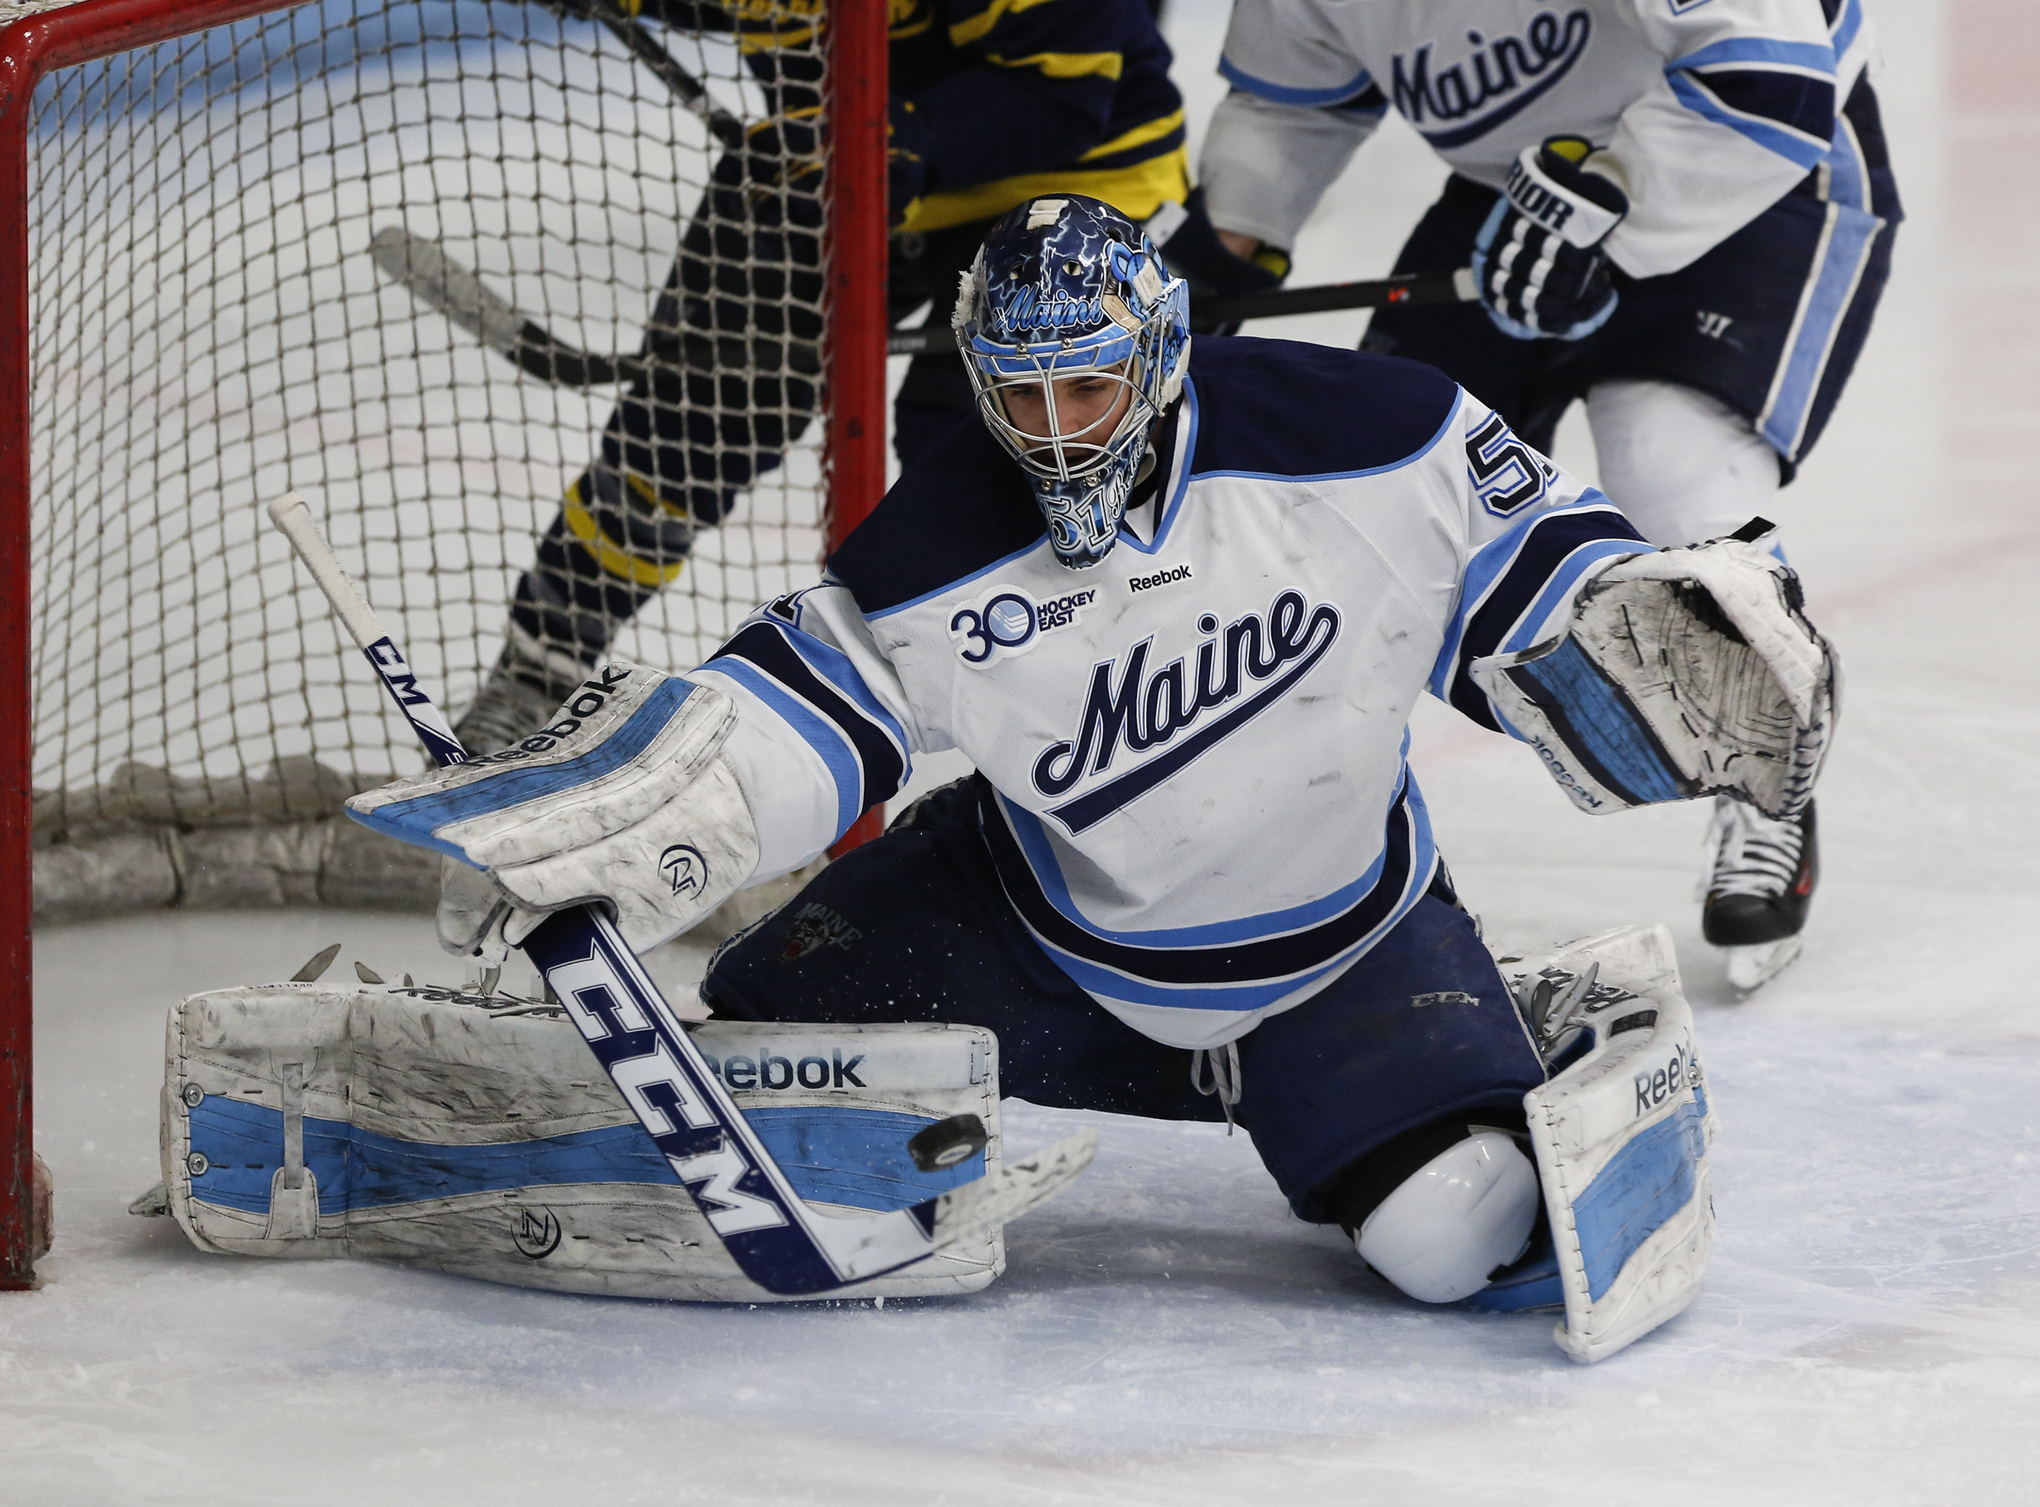 Maine senior goaltender Martin Ouellette makes one of his 29 saves in his team's 2-0 Hockey East playoff victory over Merrimack.